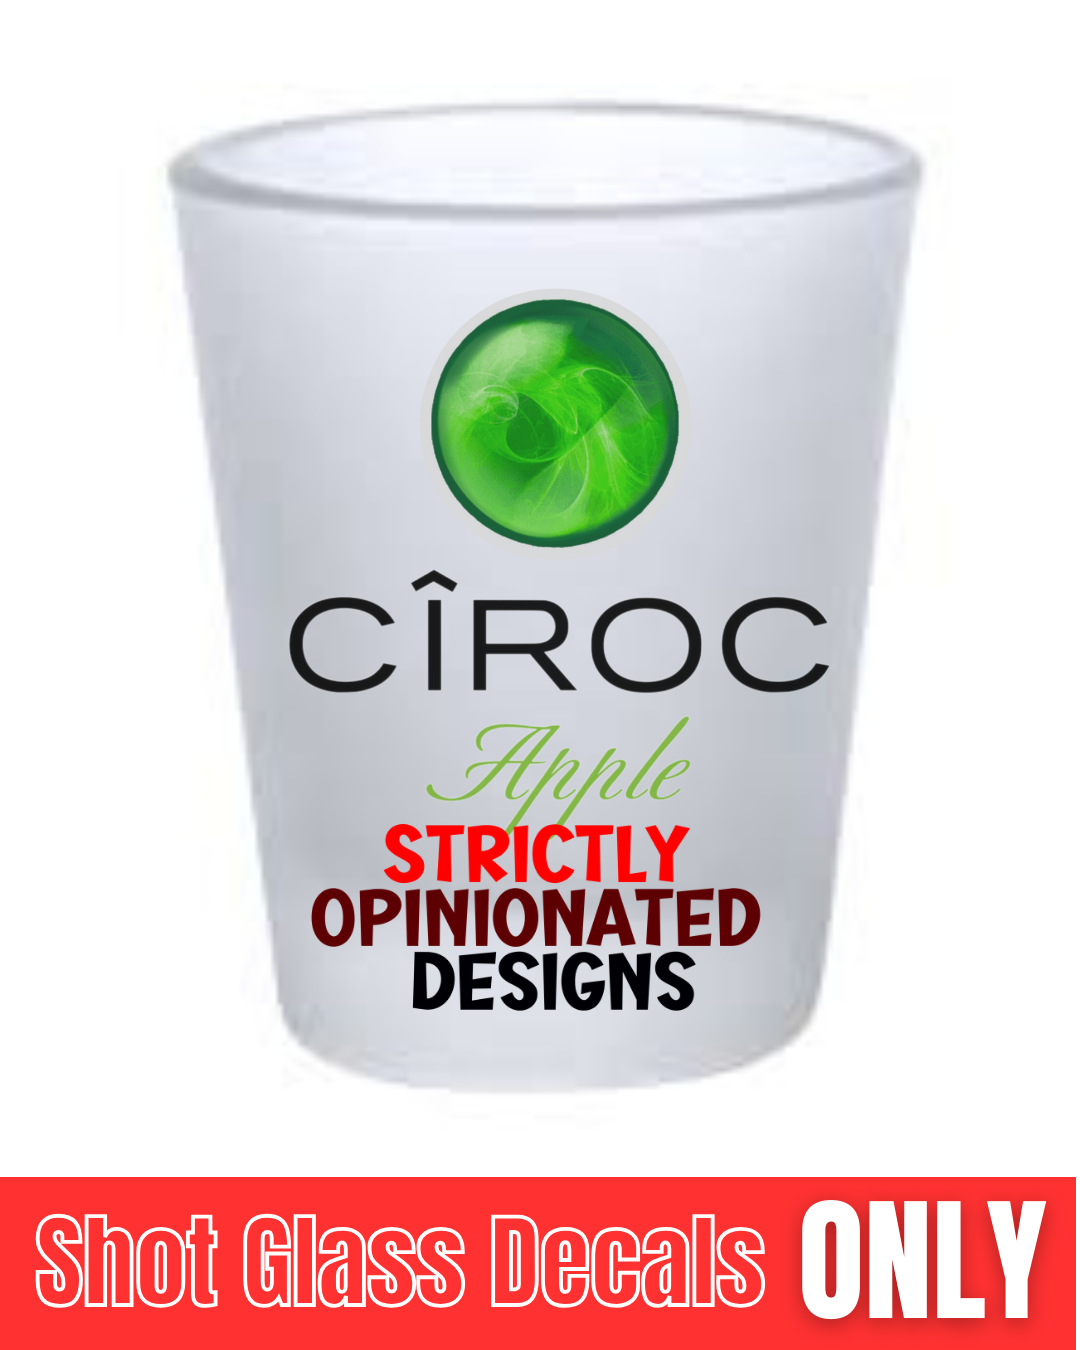 Ciroc "Novelty"  Shot Glass Label Bundle(Decal Only)